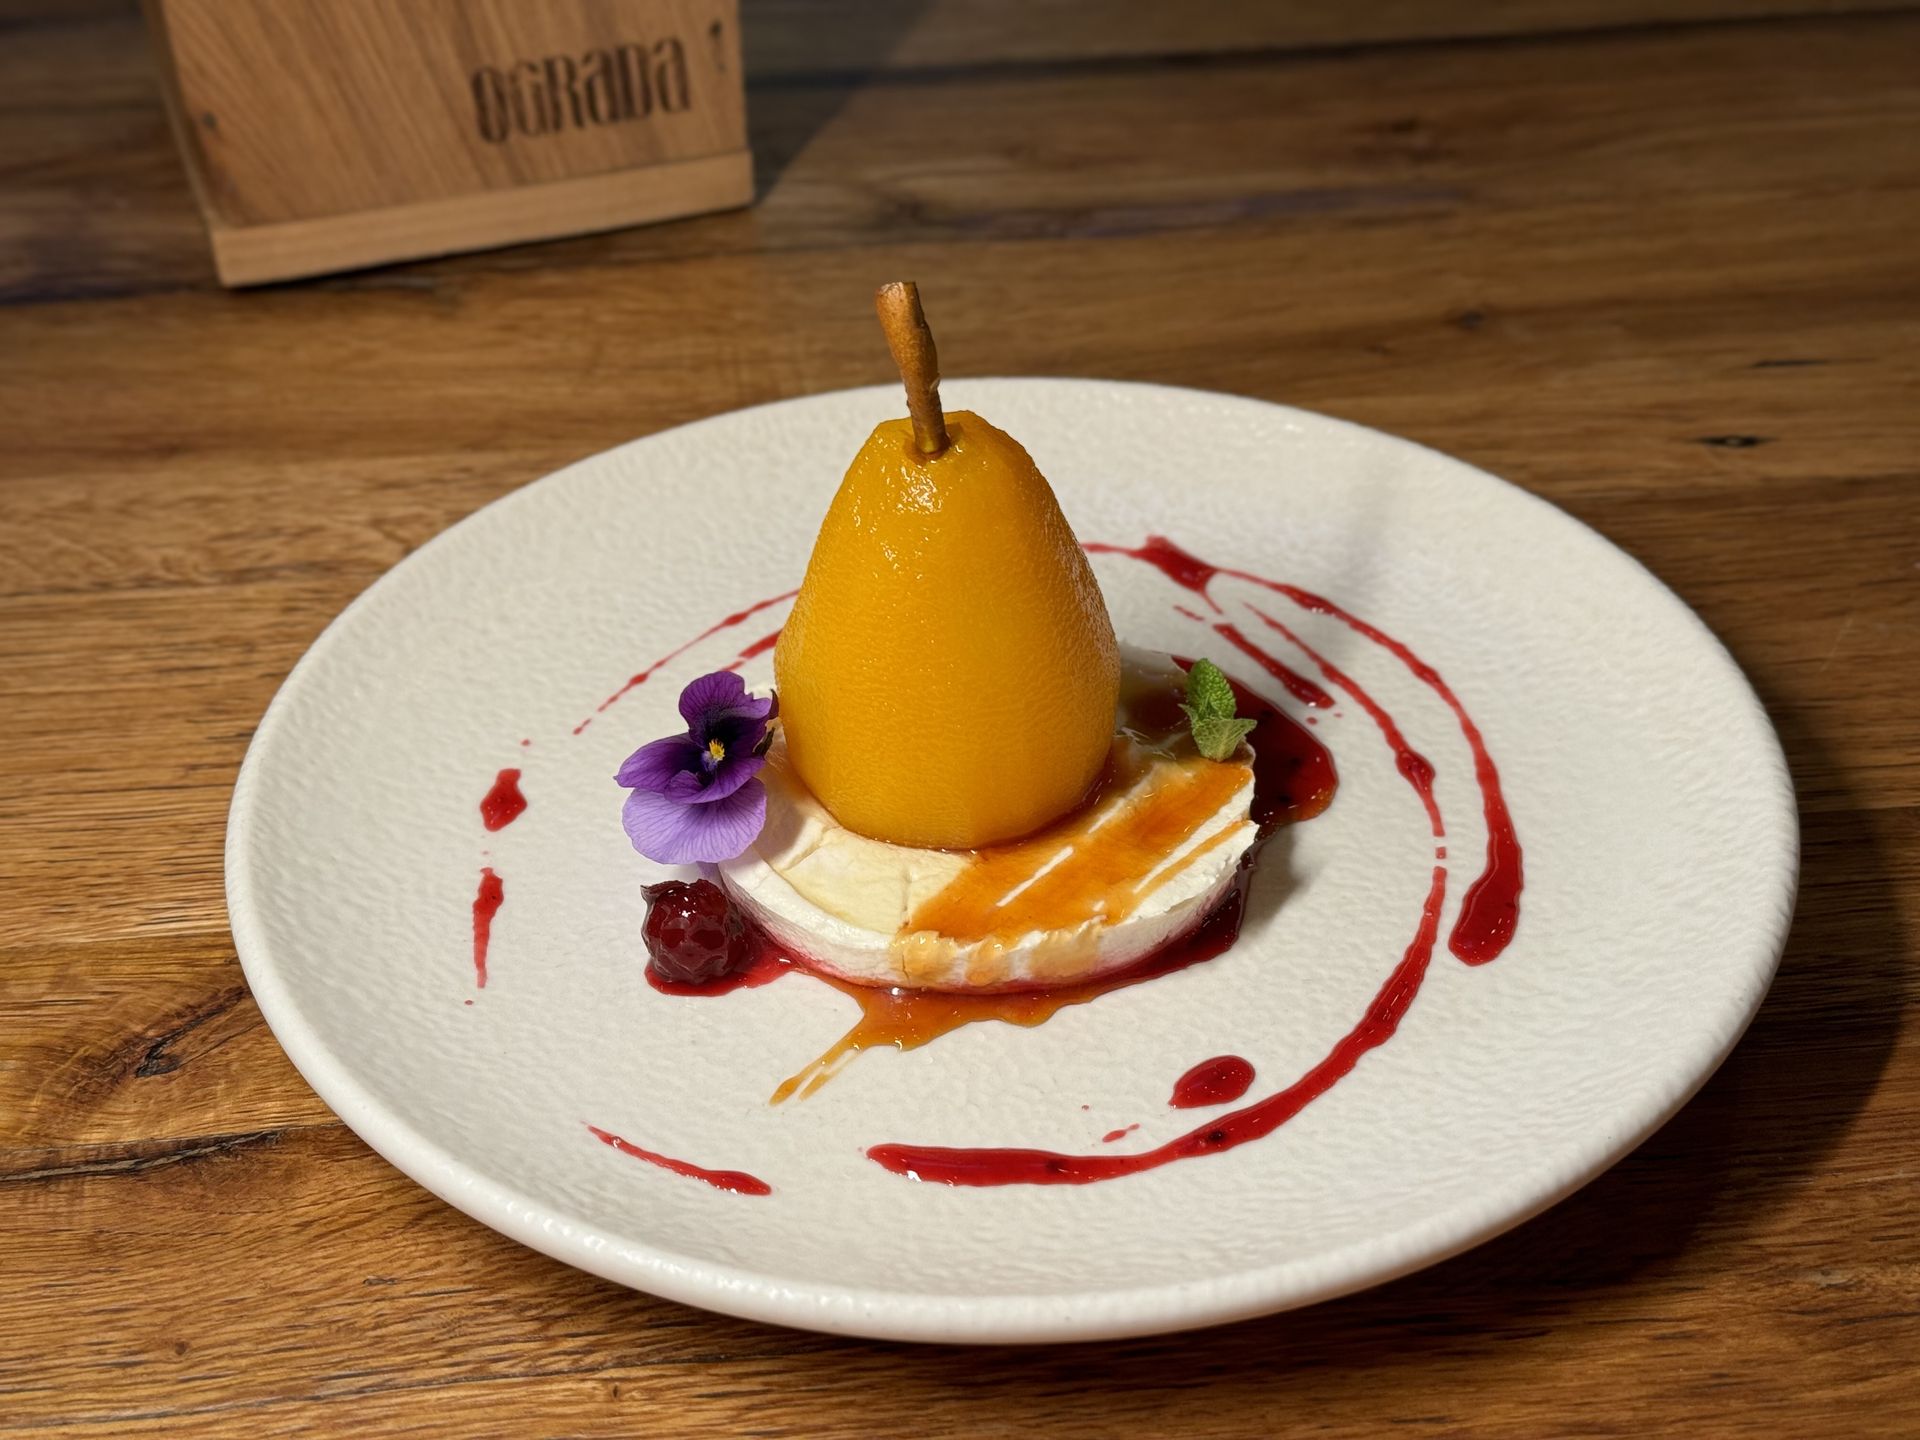 Poached pear with white chocolate mousse